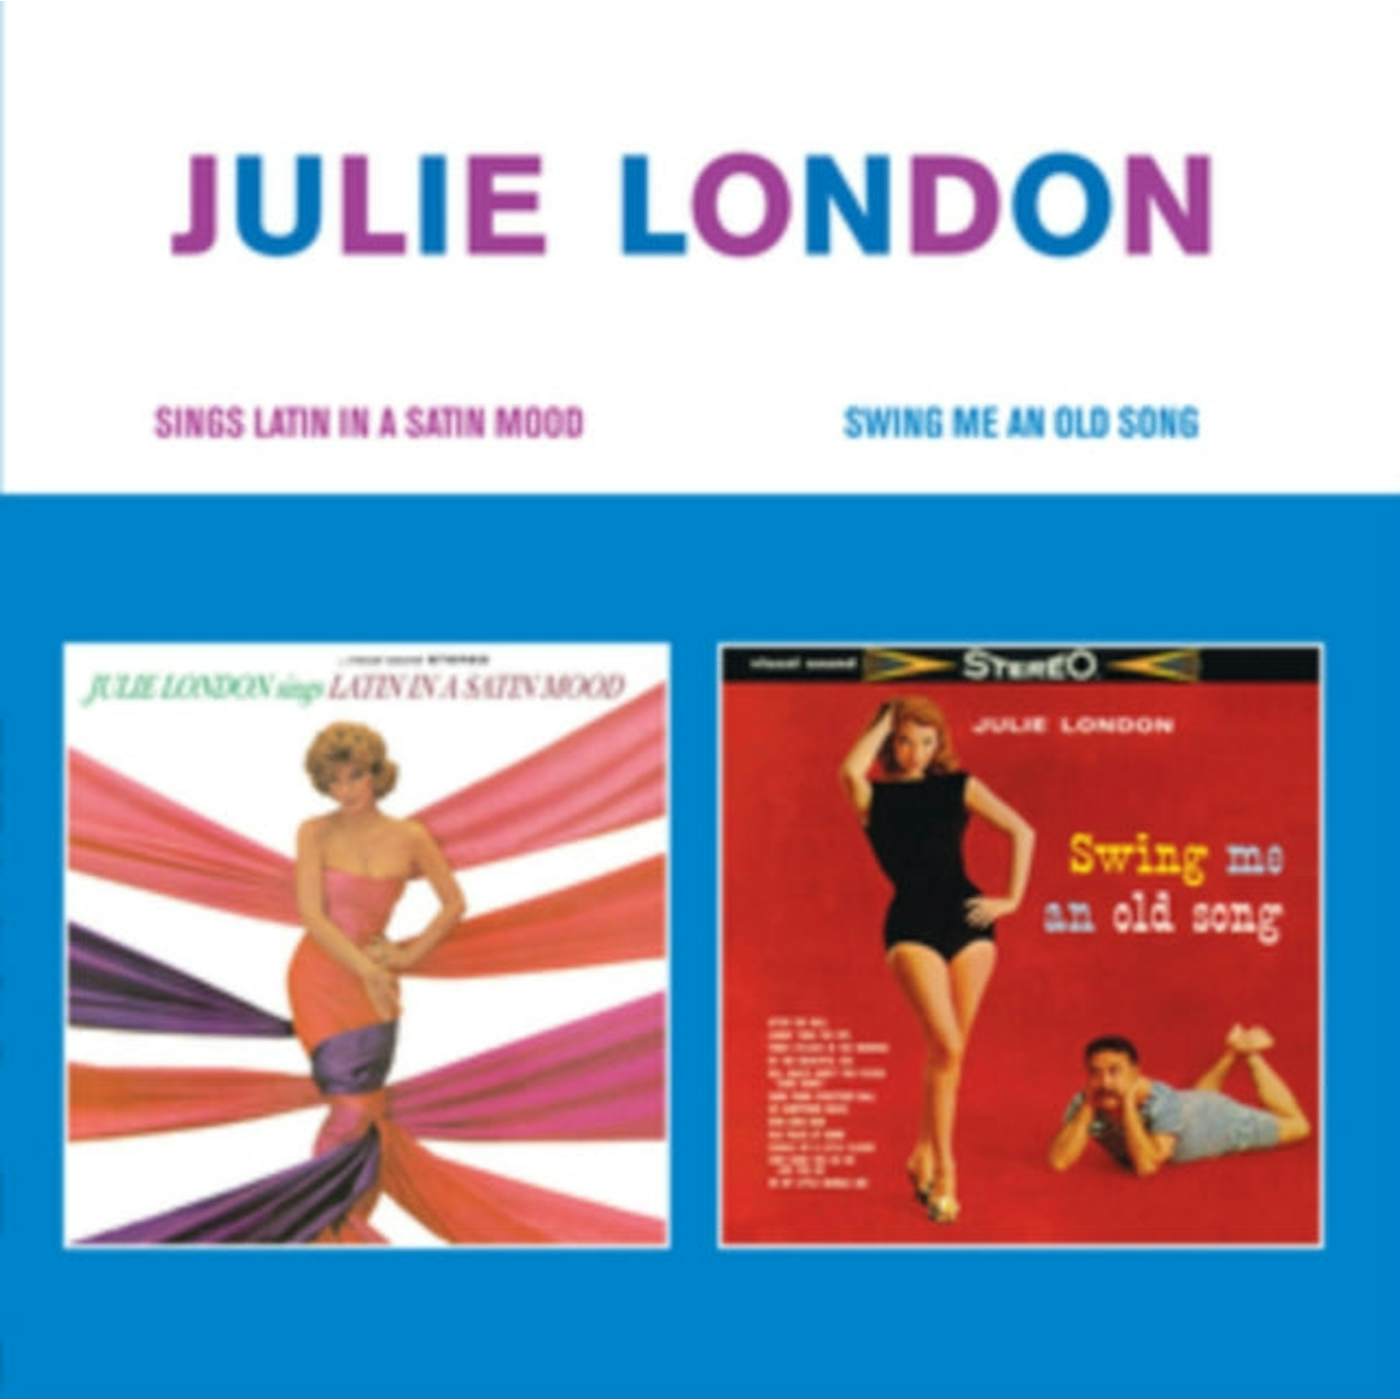 Julie London CD - Sings Latin In A Satin Mood + Swing Me An Old Song